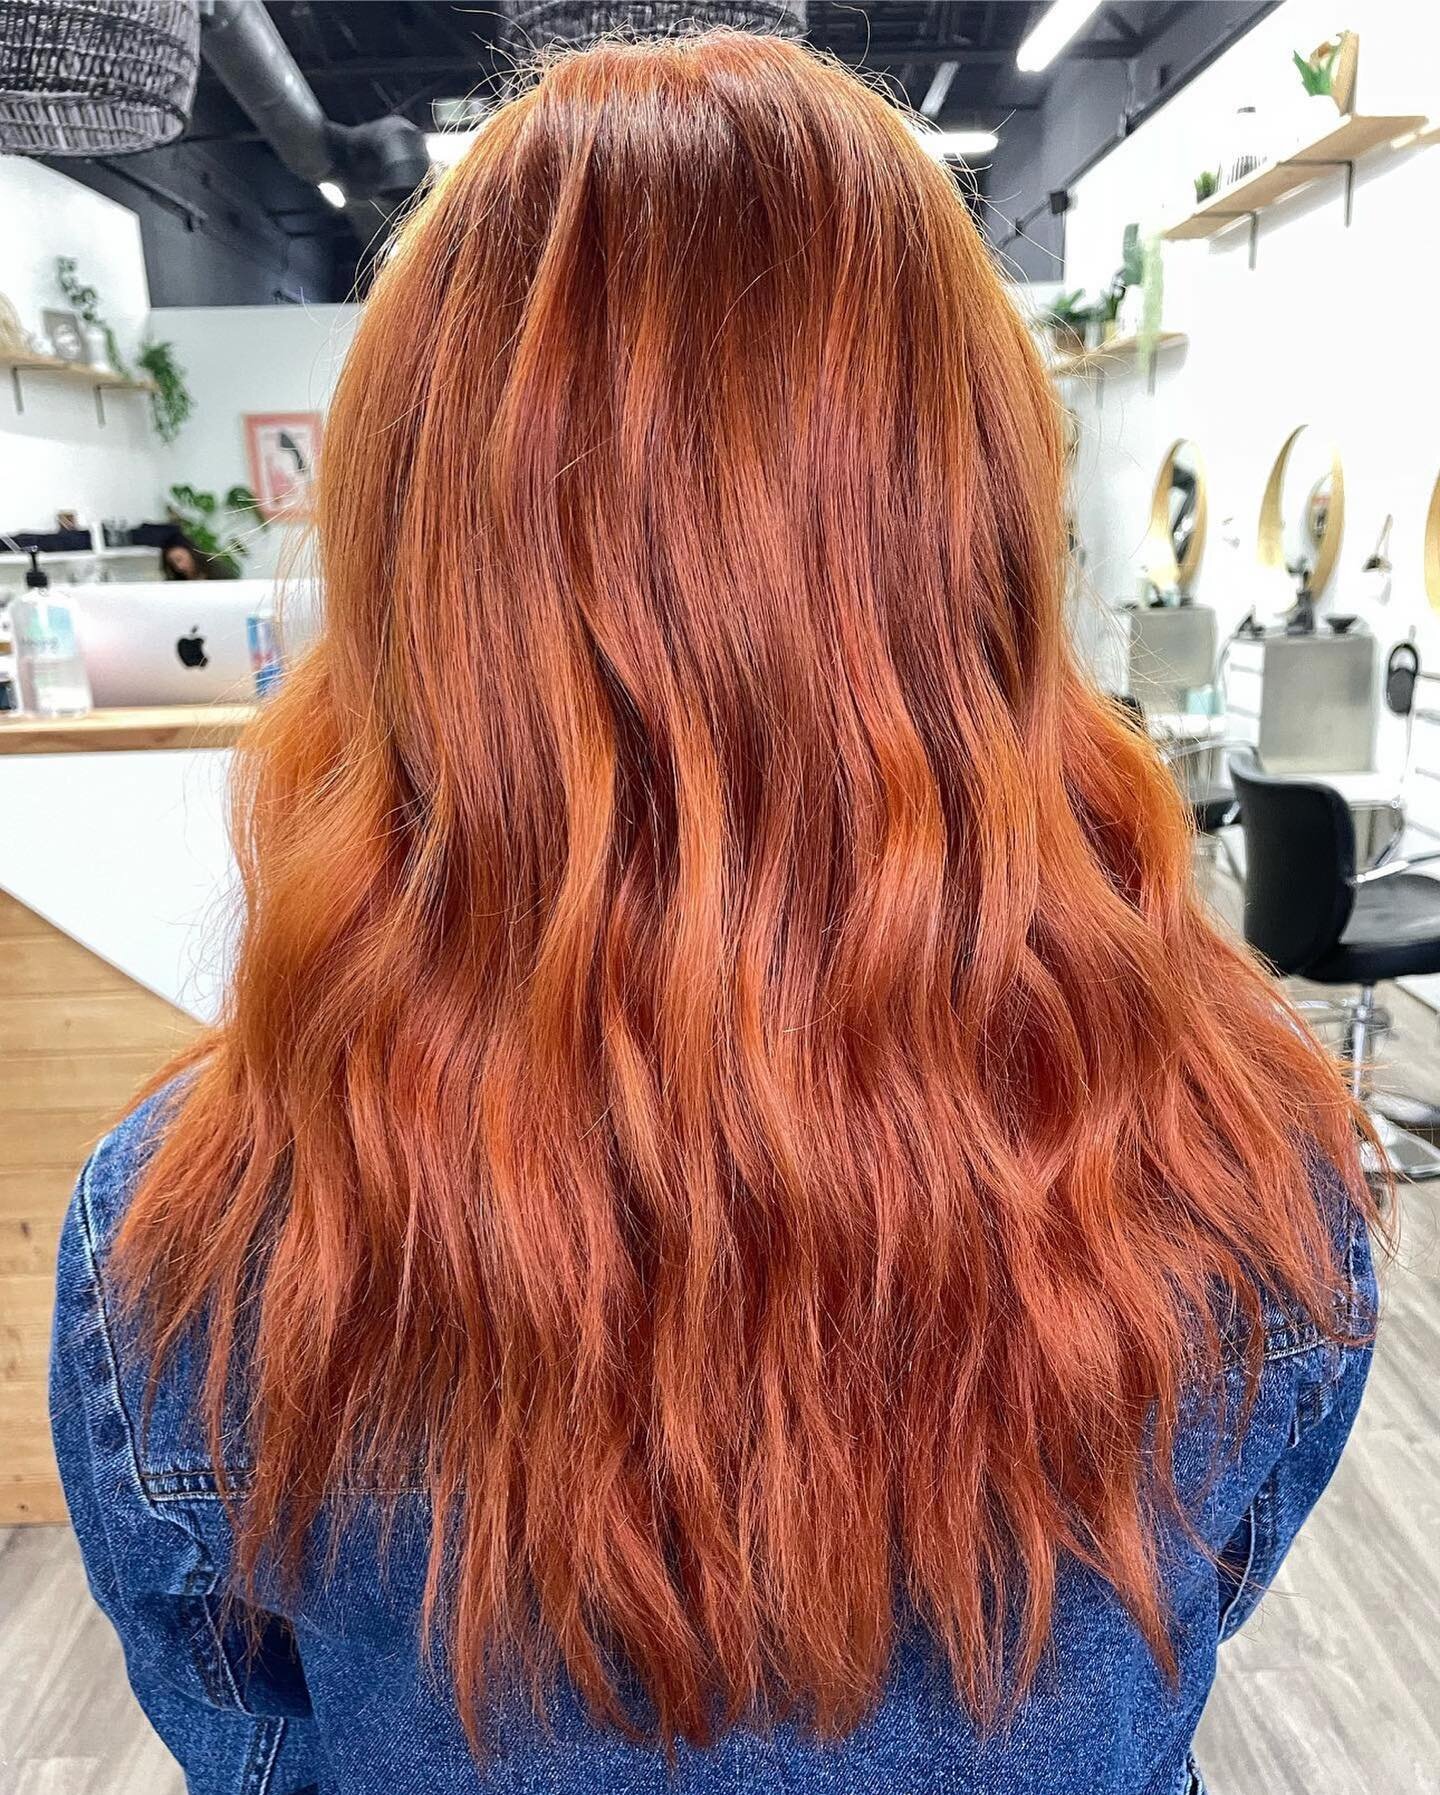 Repost from @color.me.fierce
&bull;
GingerSNAP look at this readhead! @pulpriothair #faction8 reds just killing it! #redhair #redhead #redhairdontcare #copperhair #copper #pulpriot #hairtransformation #newdo #hairgoals #hairinspo #tacomasalon #tacoma